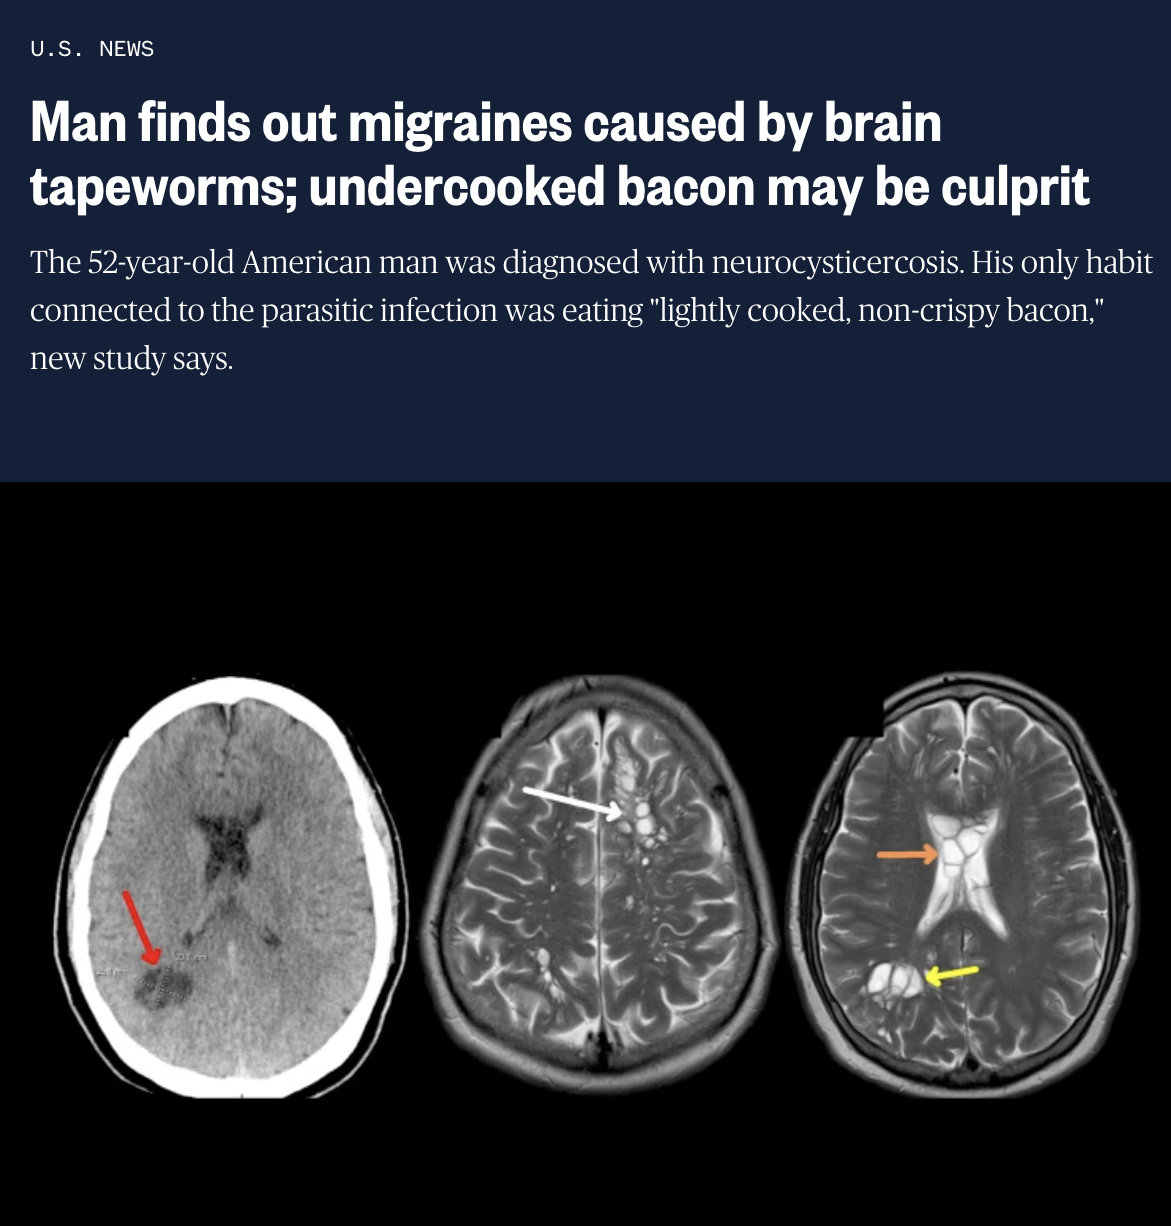 brain - U.S. News Man finds out migraines caused by brain tapeworms; undercooked bacon may be culprit The 52yearold American man was diagnosed with neurocysticercosis. His only habit connected to the parasitic infection was eating "lightly cooked, noncris